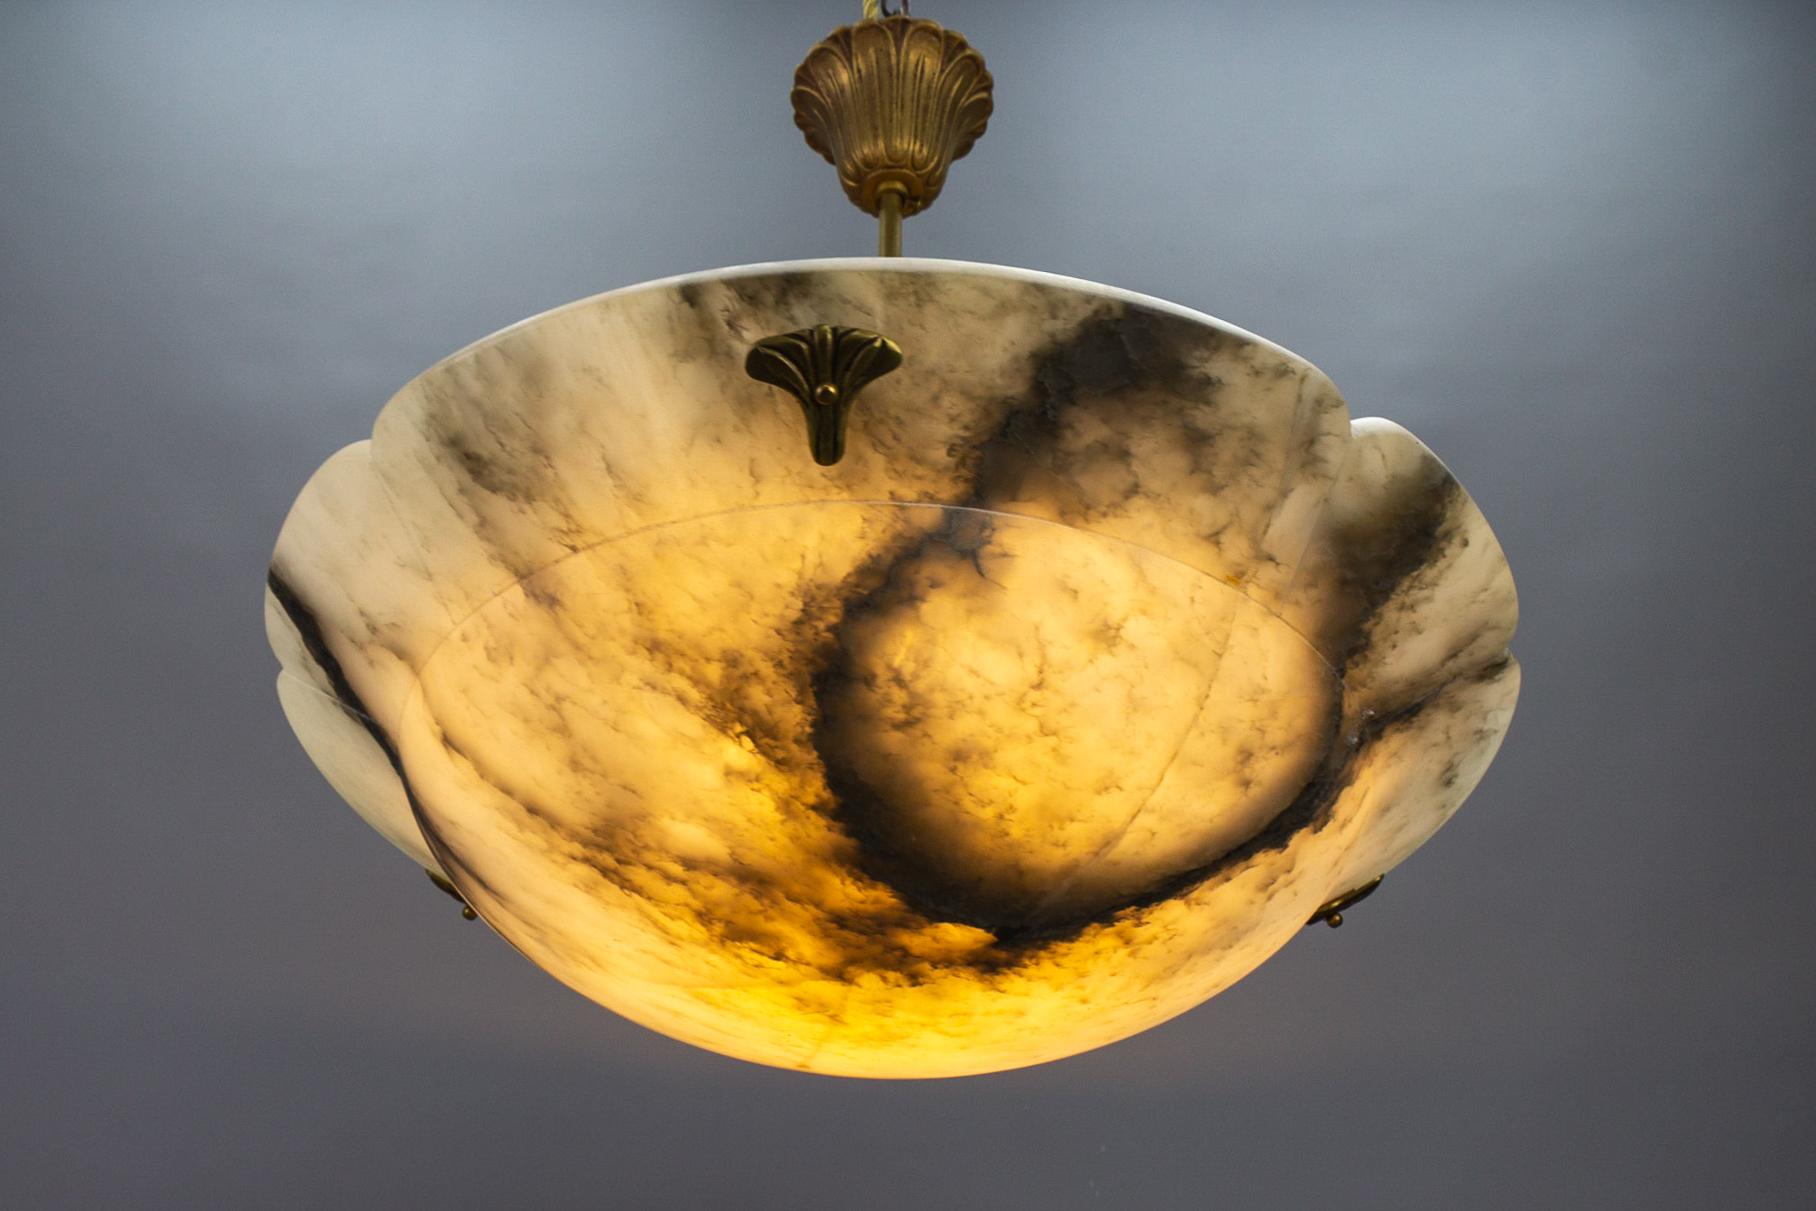 French Art Deco style black veined white alabaster pendant light fixture.
Gorgeous and beautifully shaped alabaster pendant ceiling light fixture from circa 1949. Superbly veined and masterfully carved white alabaster bowl suspended by three chains